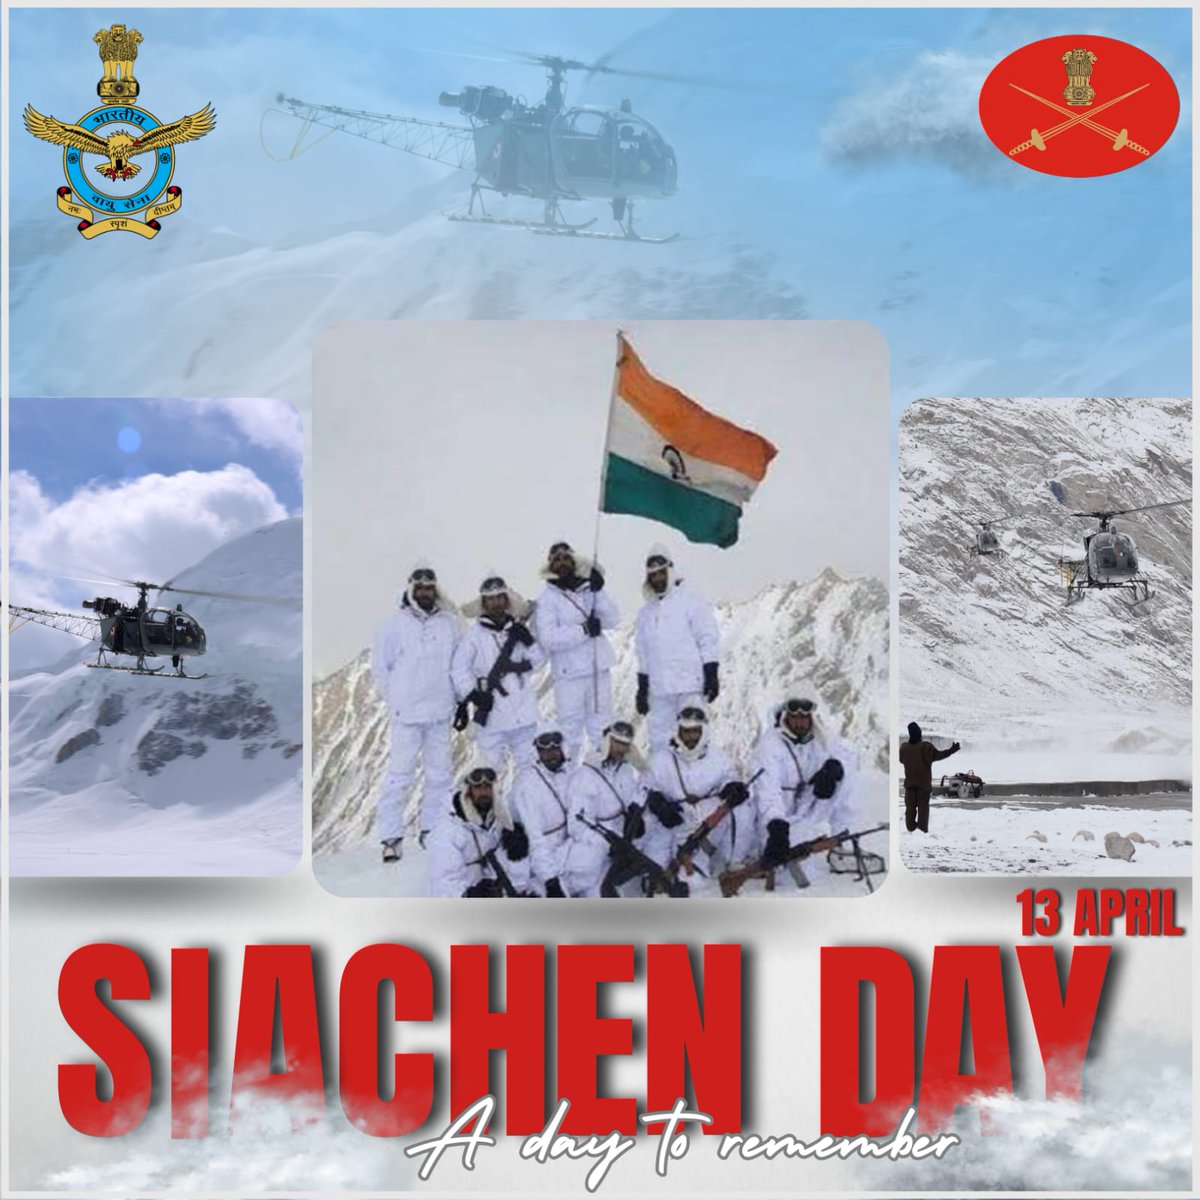 Saluting the indomitable spirit and bravery of our brethren on this #SiachenDay. The CAS, Air Chief Marshal VR Chaudhari and all #IAF personnel pay our sincere homage to the innumerable sacrifices made over the years in defending our nation's highest battleground. Jai Hind!